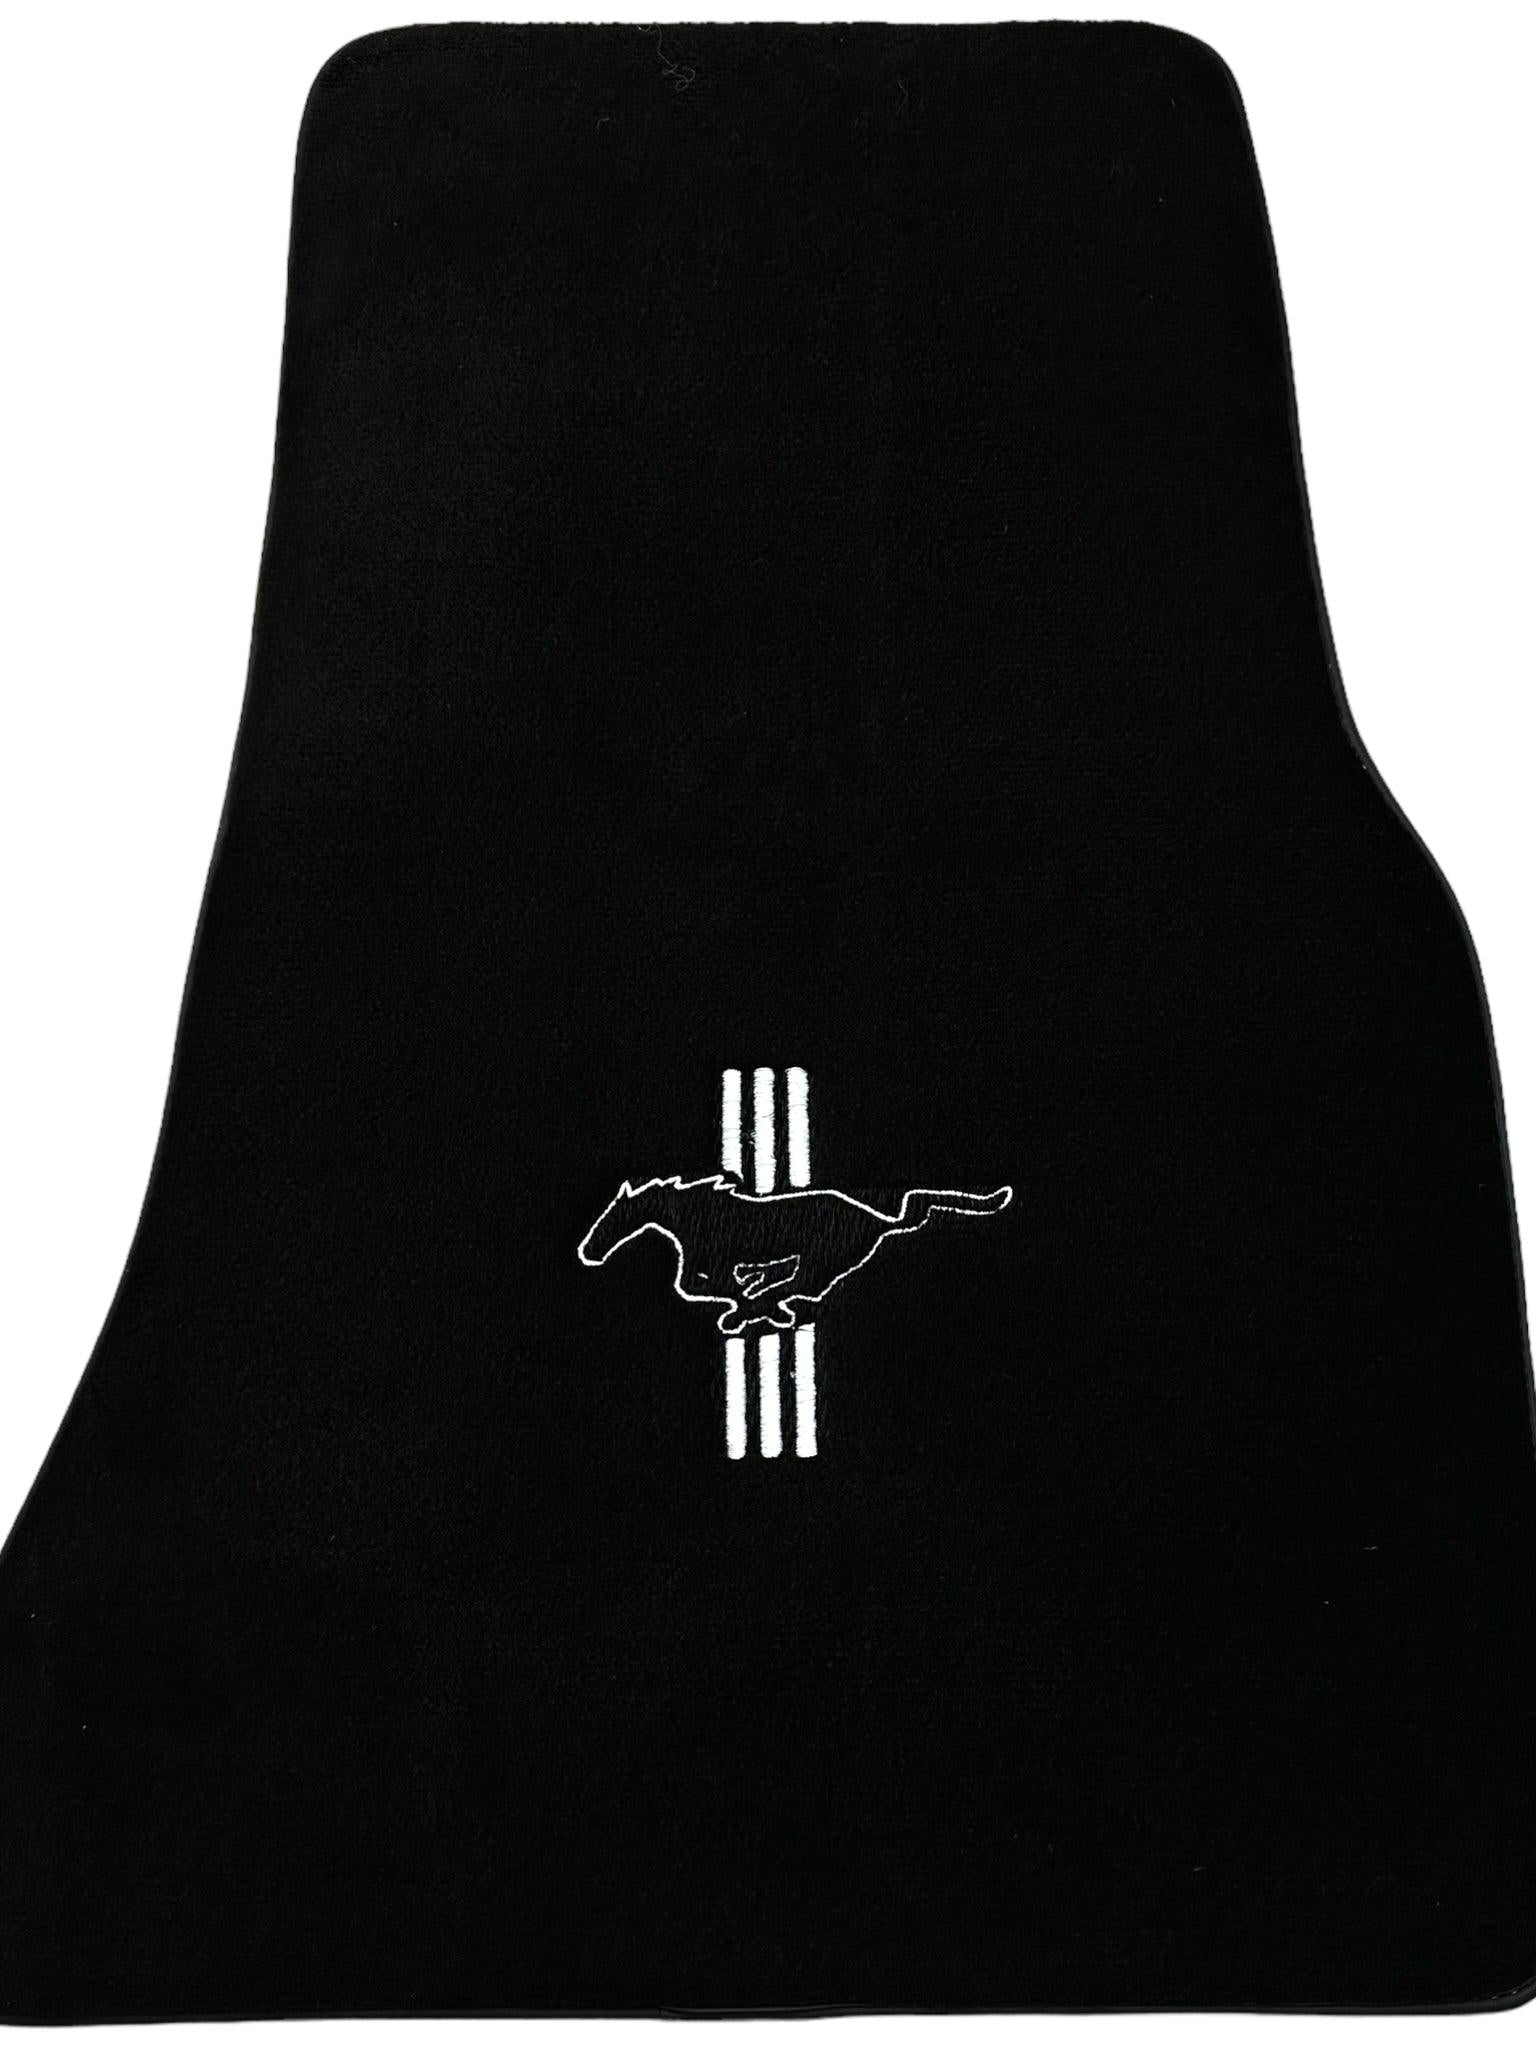 Black Floor Mats For Ford Mustang V (2004-2010) With Pony